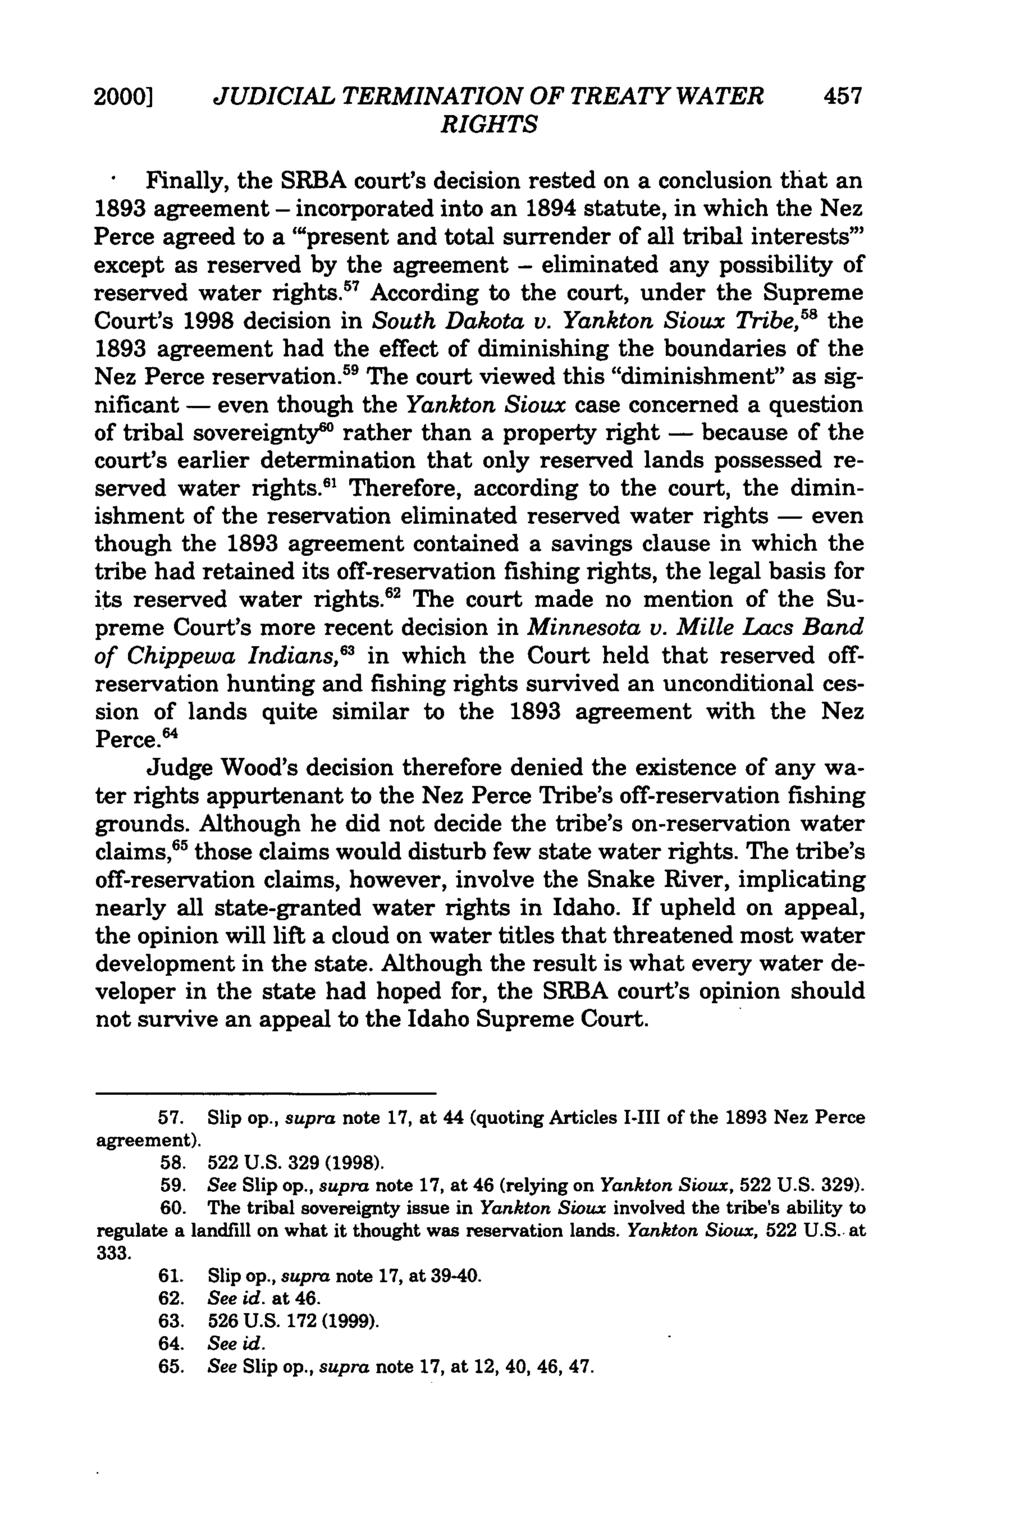 2000] JUDICIAL TERMINATION OF TREATY WATER 457 RIGHTS Finally, the SRBA court's decision rested on a conclusion that an 1893 agreement - incorporated into an 1894 statute, in which the Nez Perce